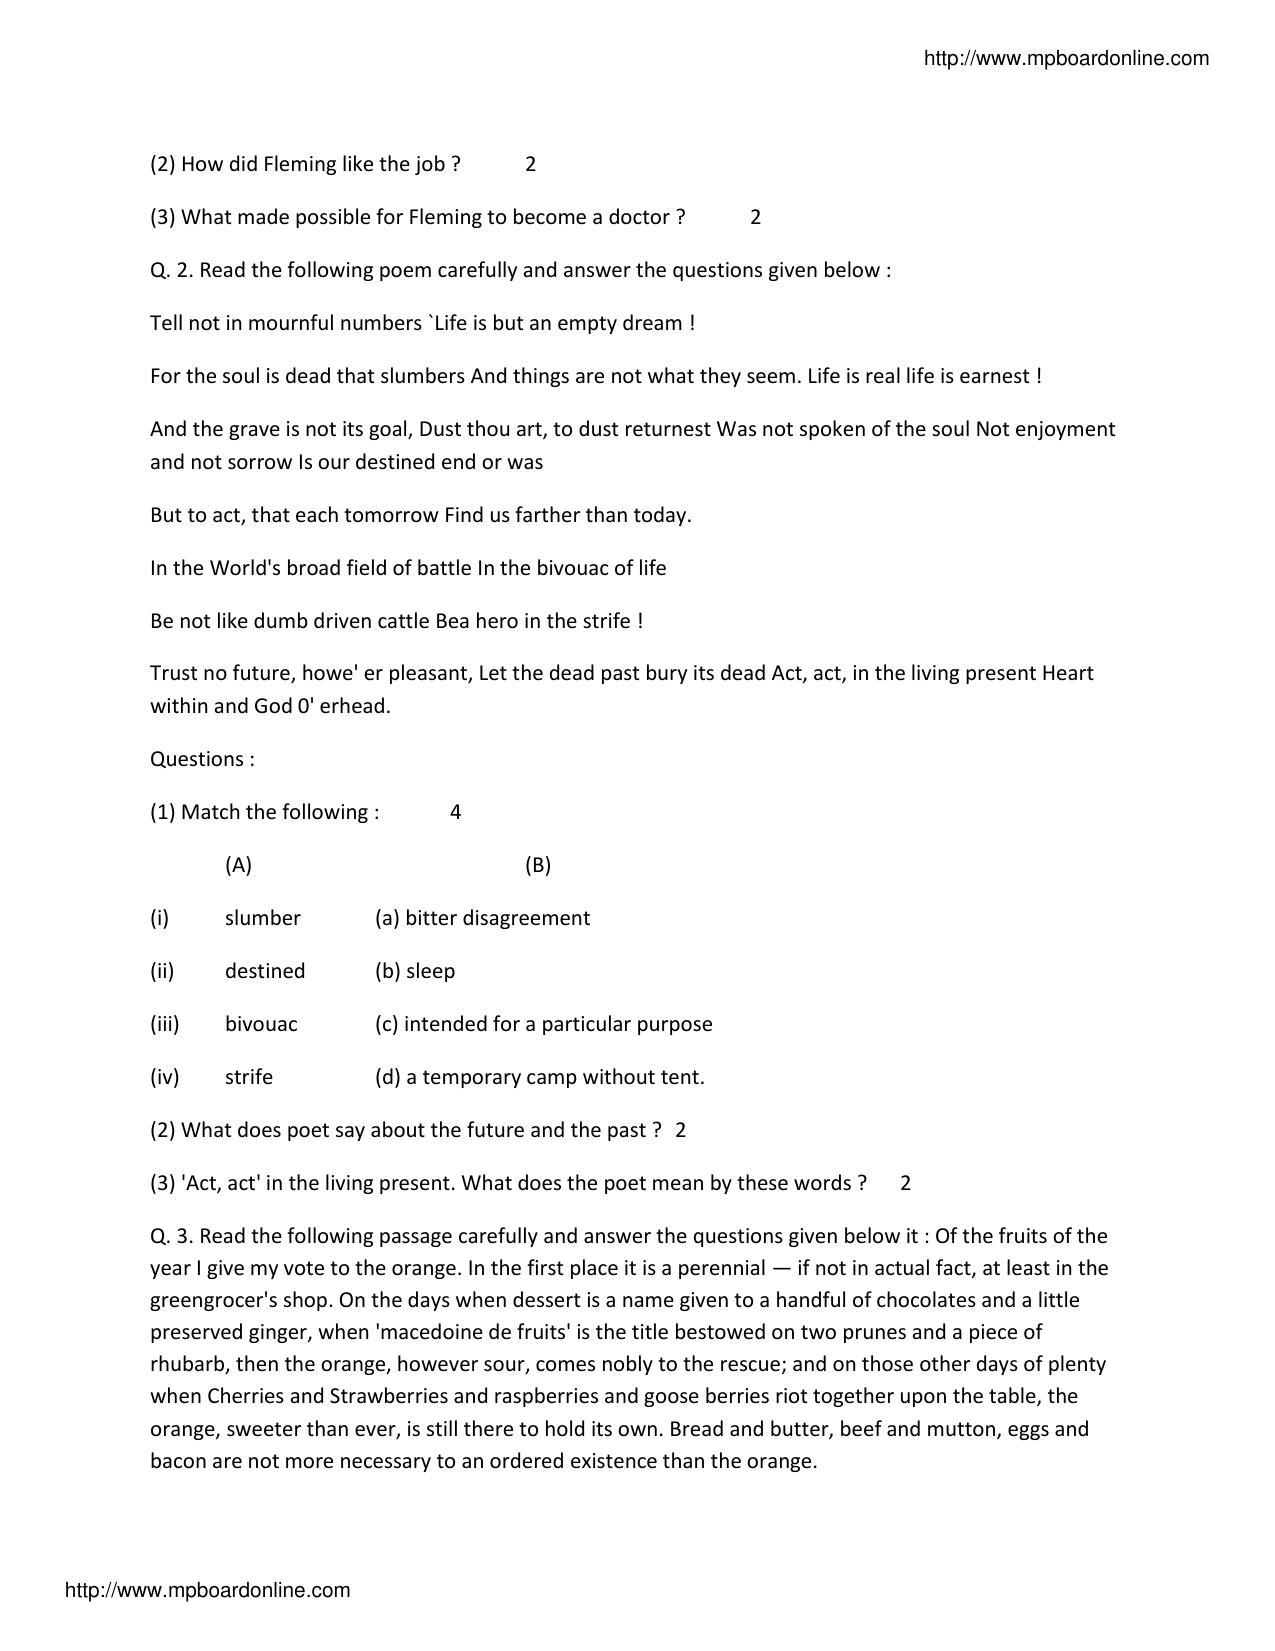 MP Board Class 10 English 2016 Question Paper - Page 2